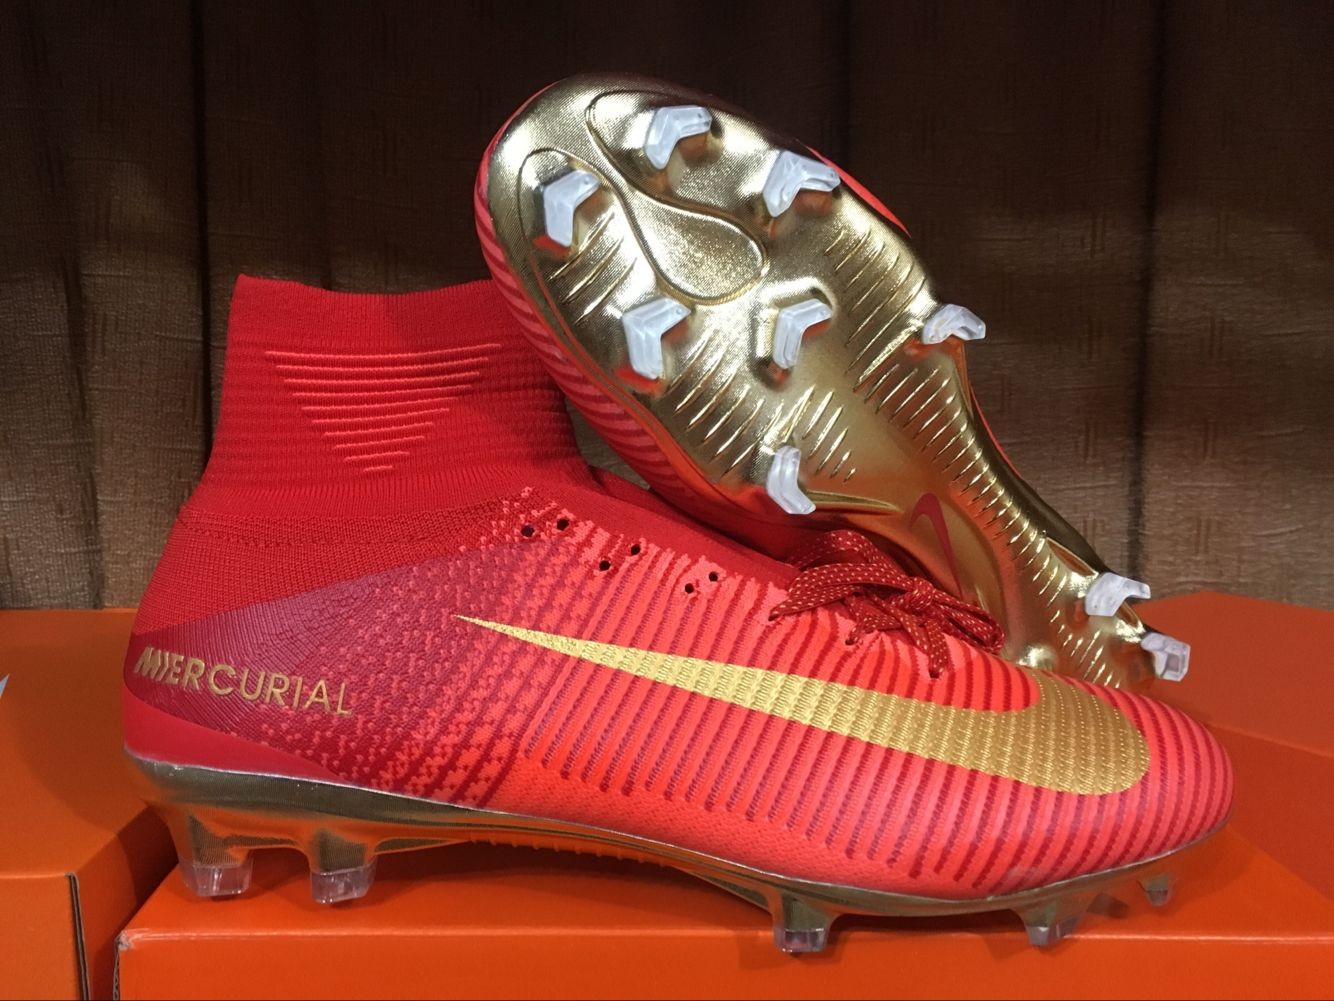 Body Book Humiliate Special Portugal Boots - Nike Mercurial Superfly V Cr7 Campeões - Red / Gold